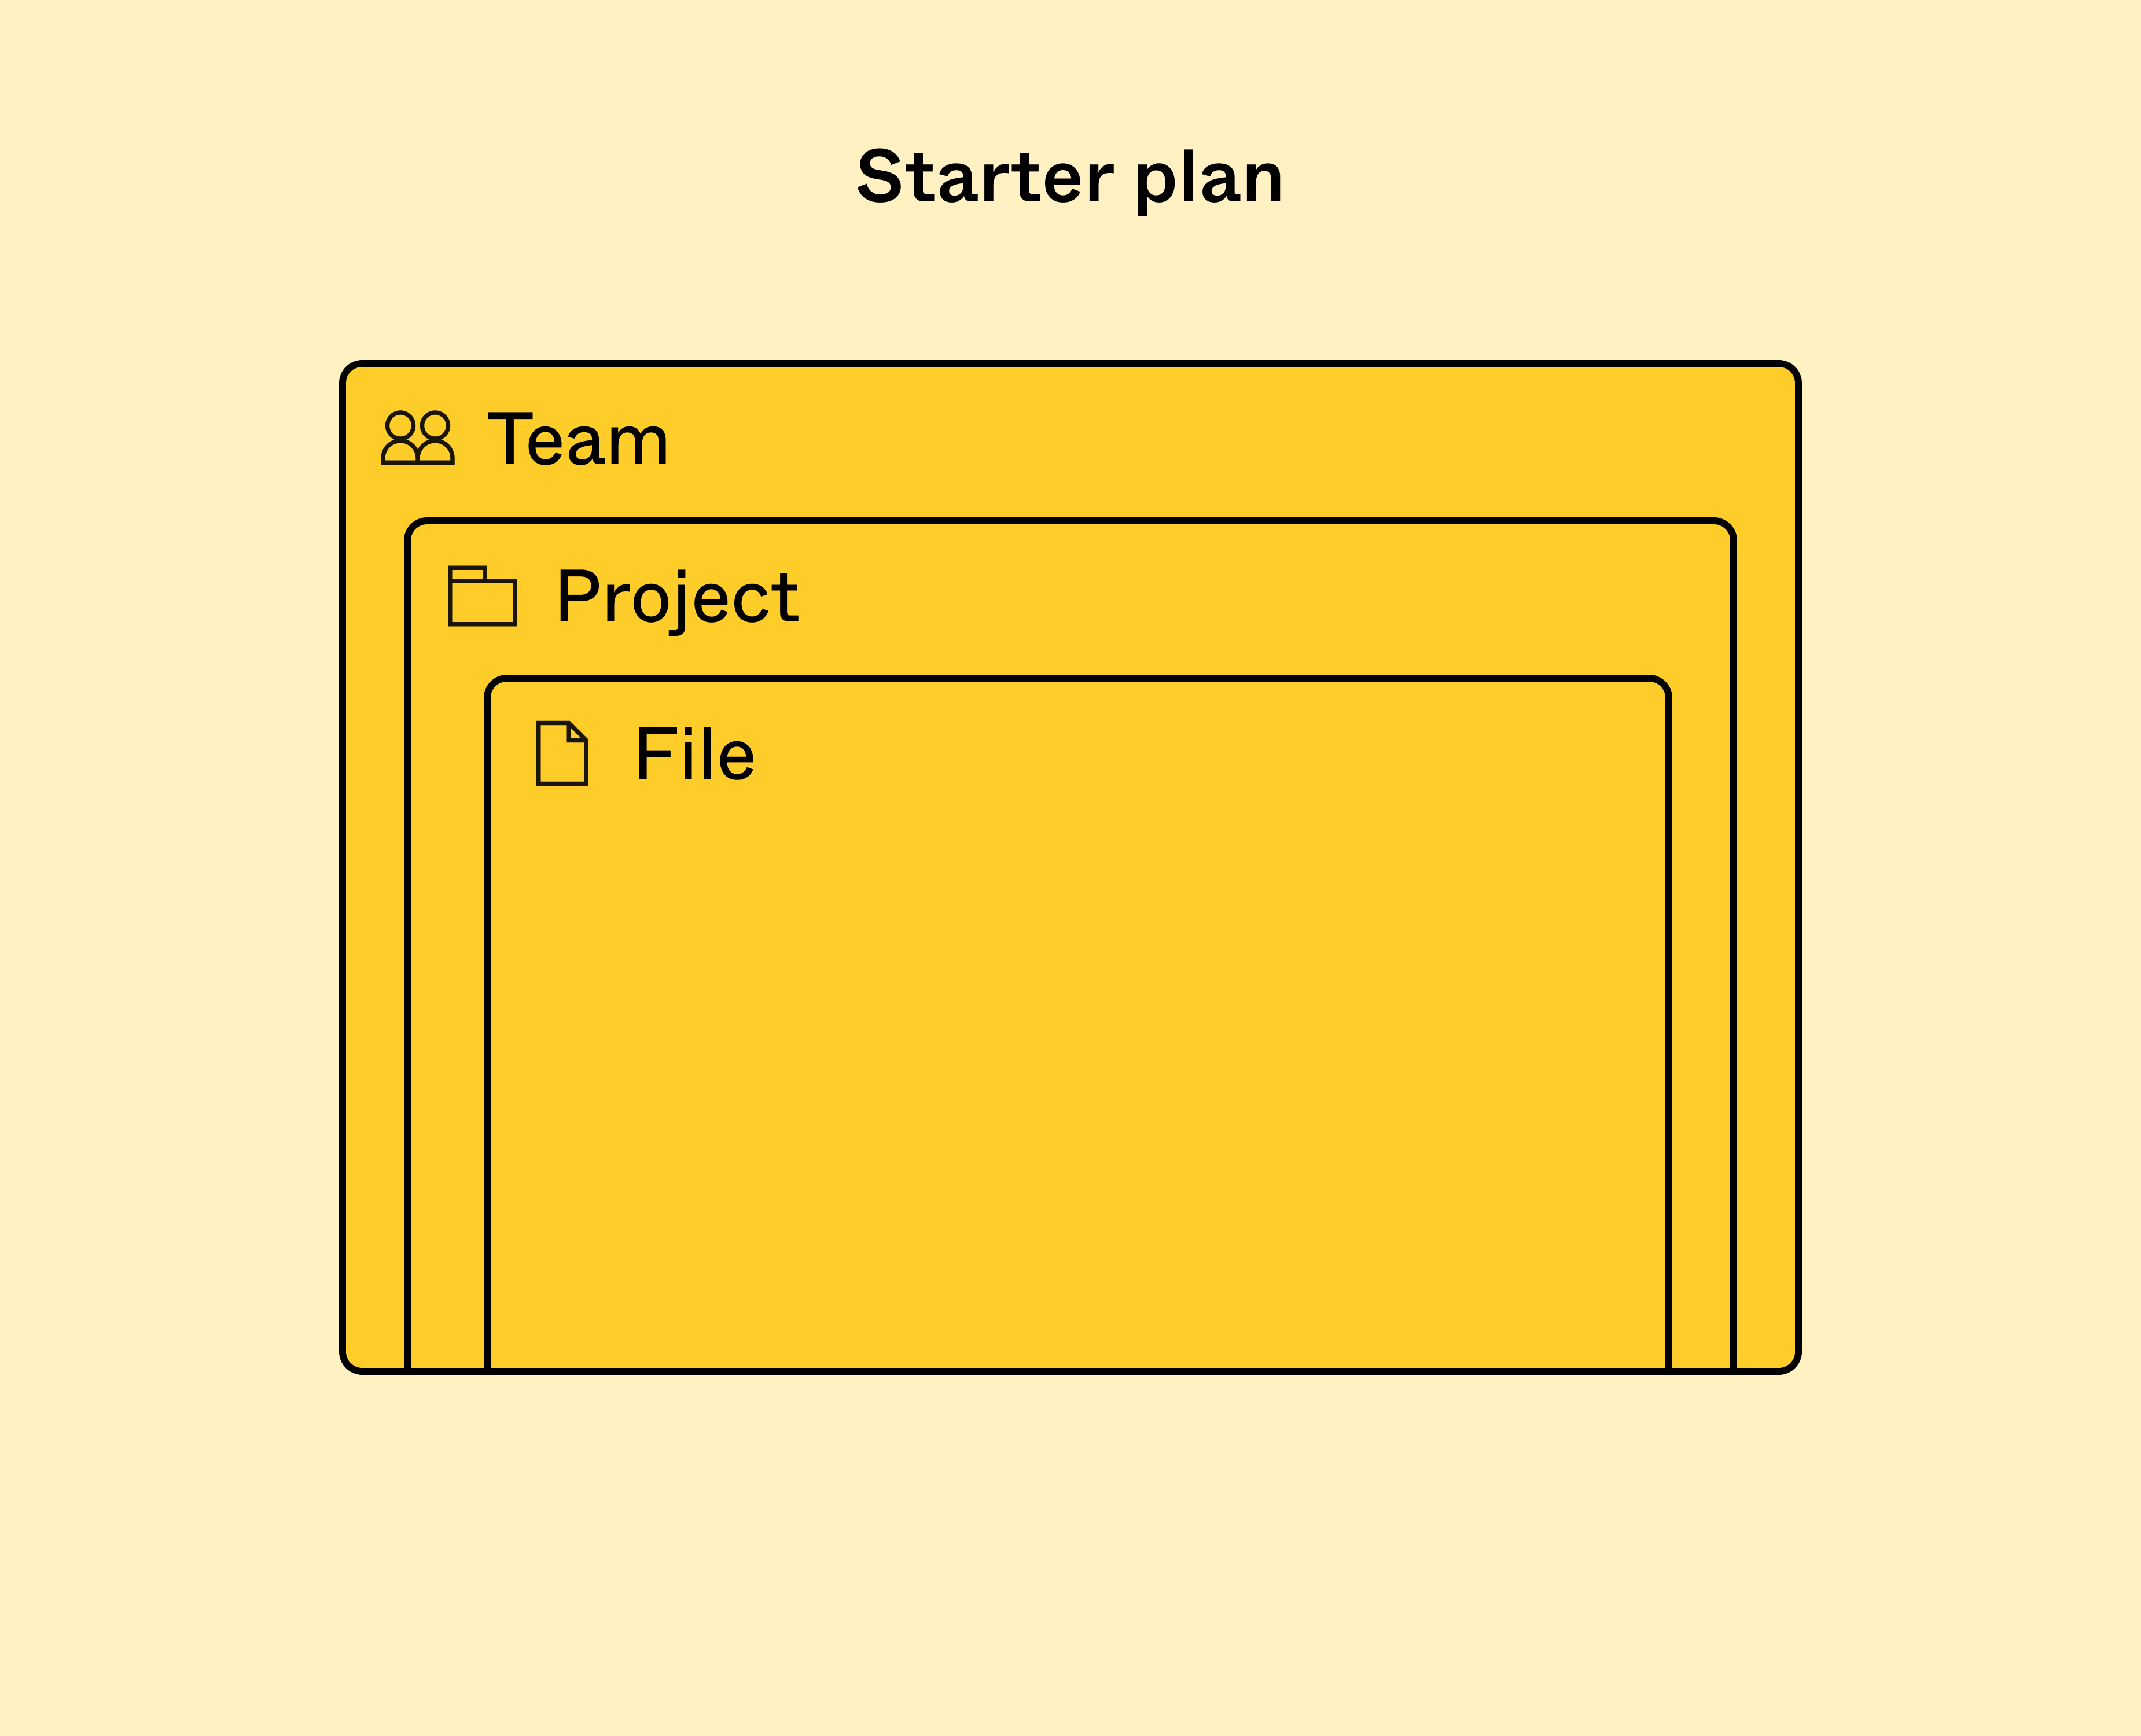 Share teams, projects, and files on the Starter plan